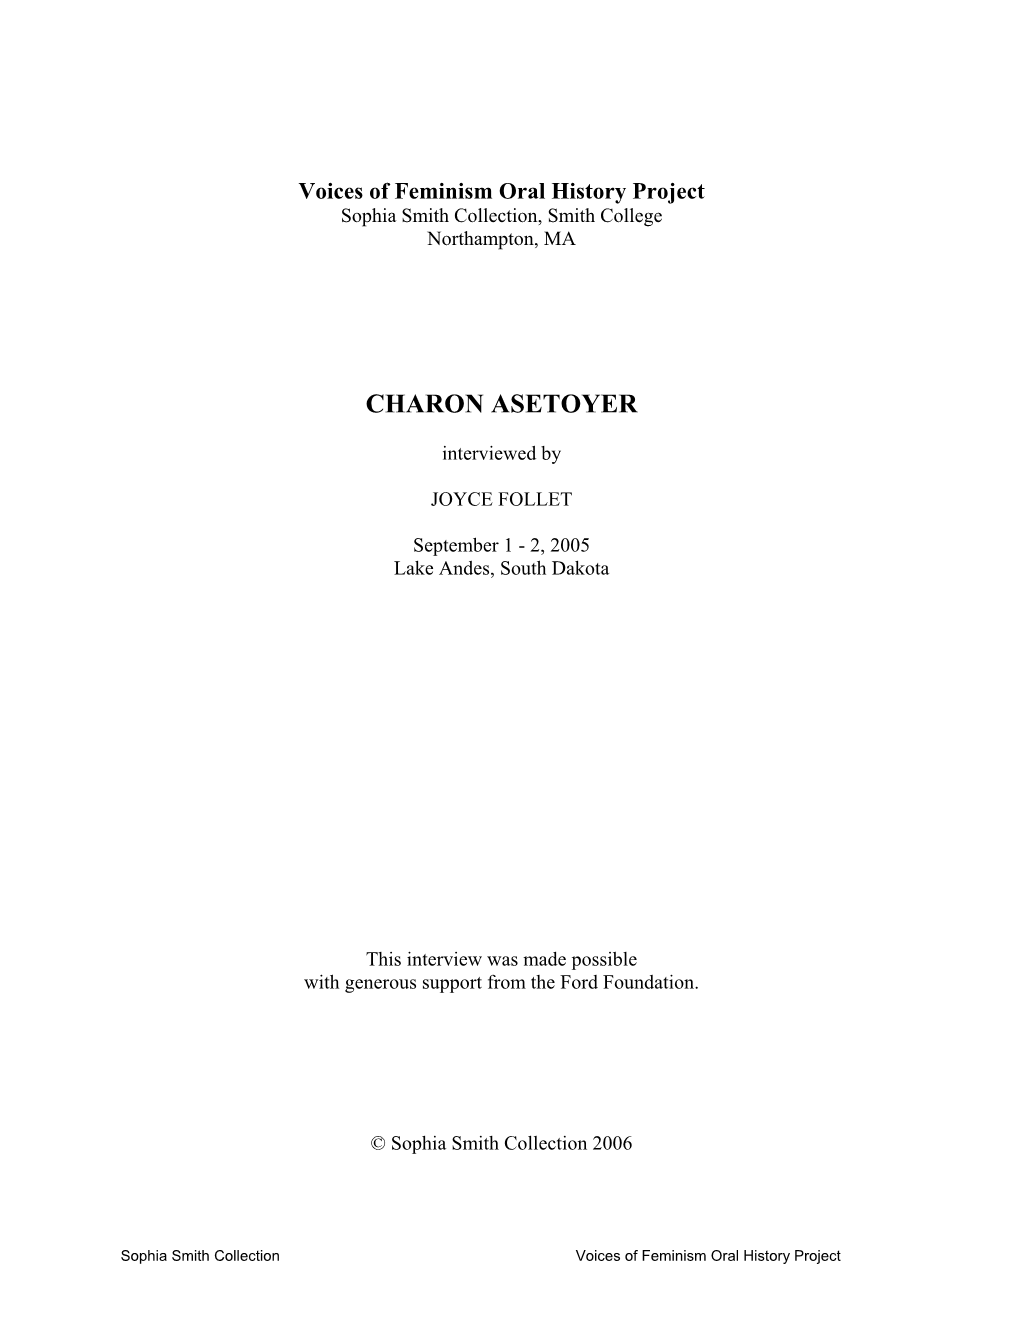 Voices of Feminism Oral History Project: Asetoyer, Charon